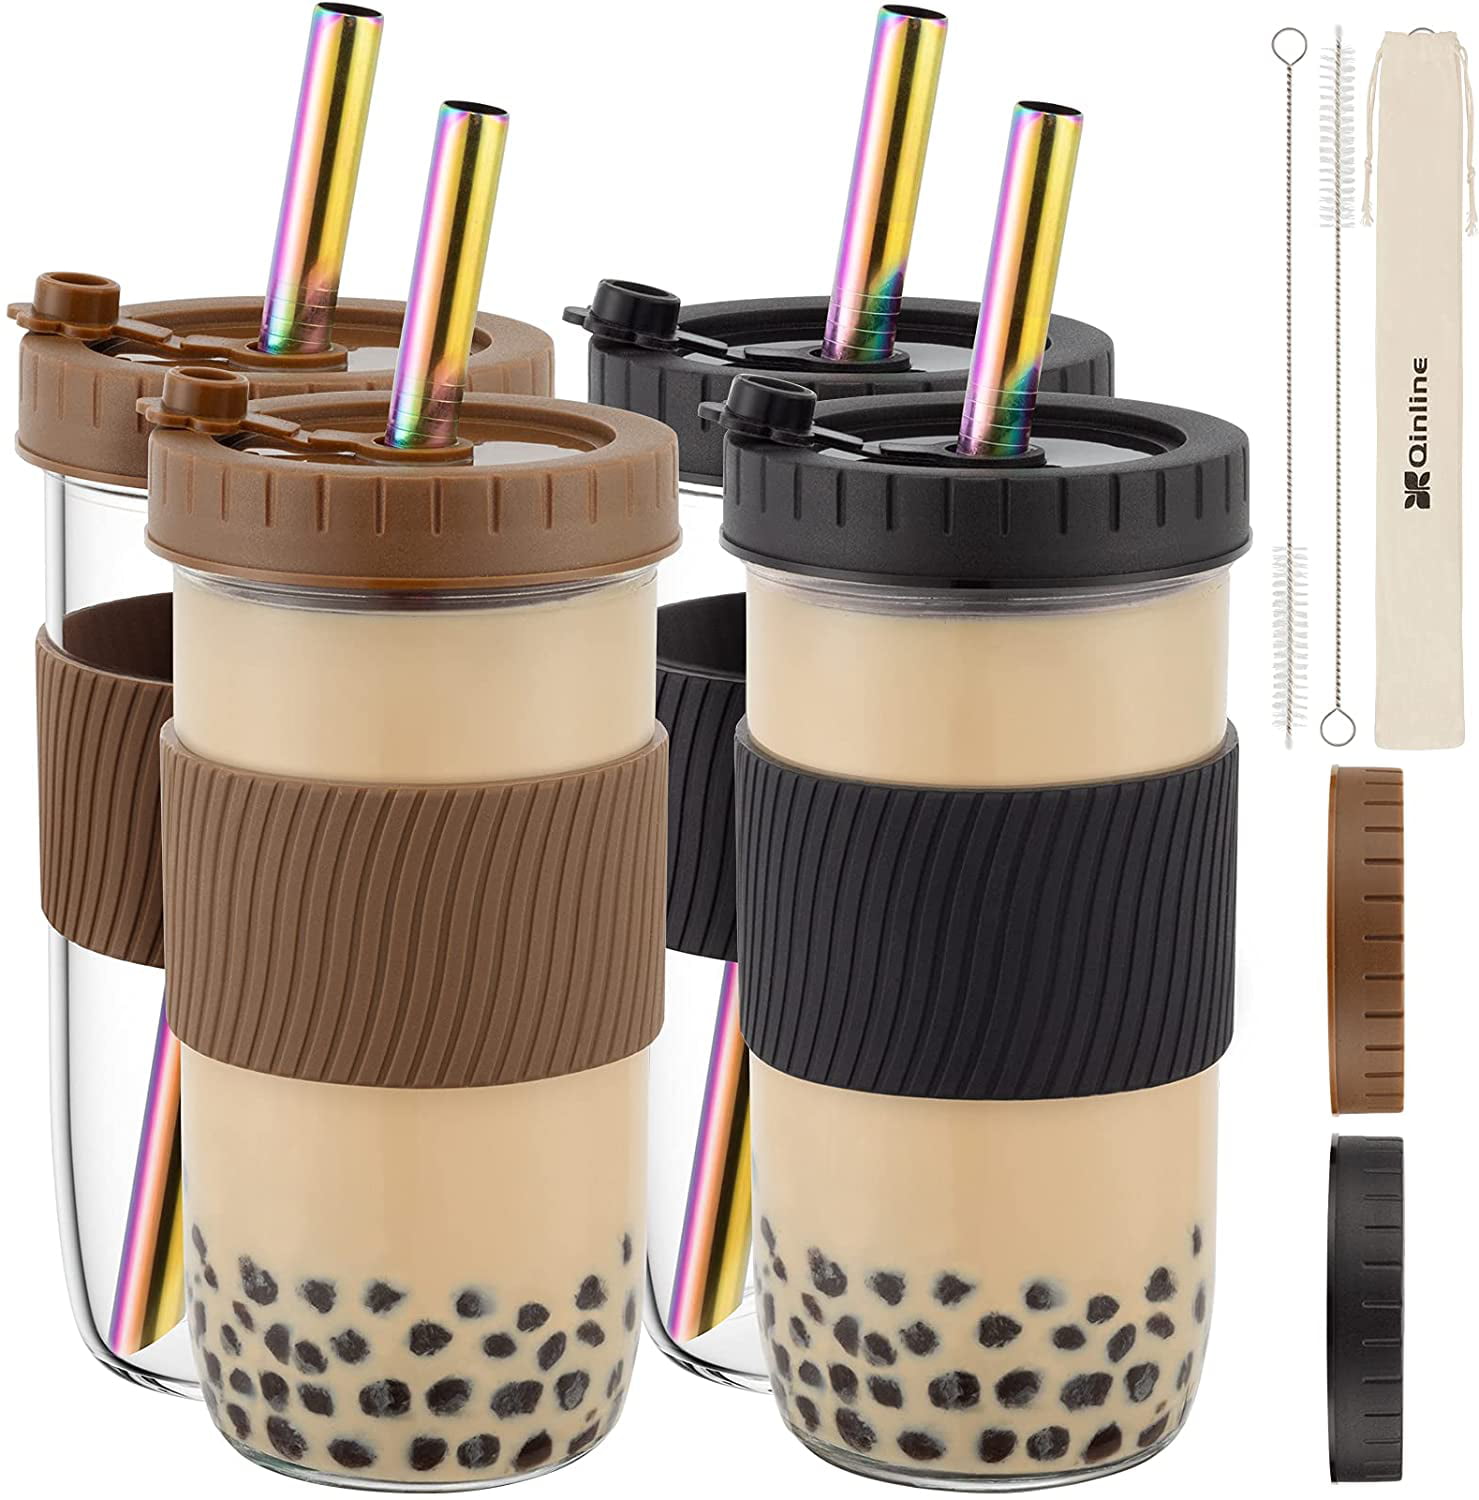 Straight and Bendy Separate 0.4 Extra Wide Straws for Bubble Tea/ Boba/ Smoothies 6 Pack Reusable Straws Silicone with Cleaning Brush